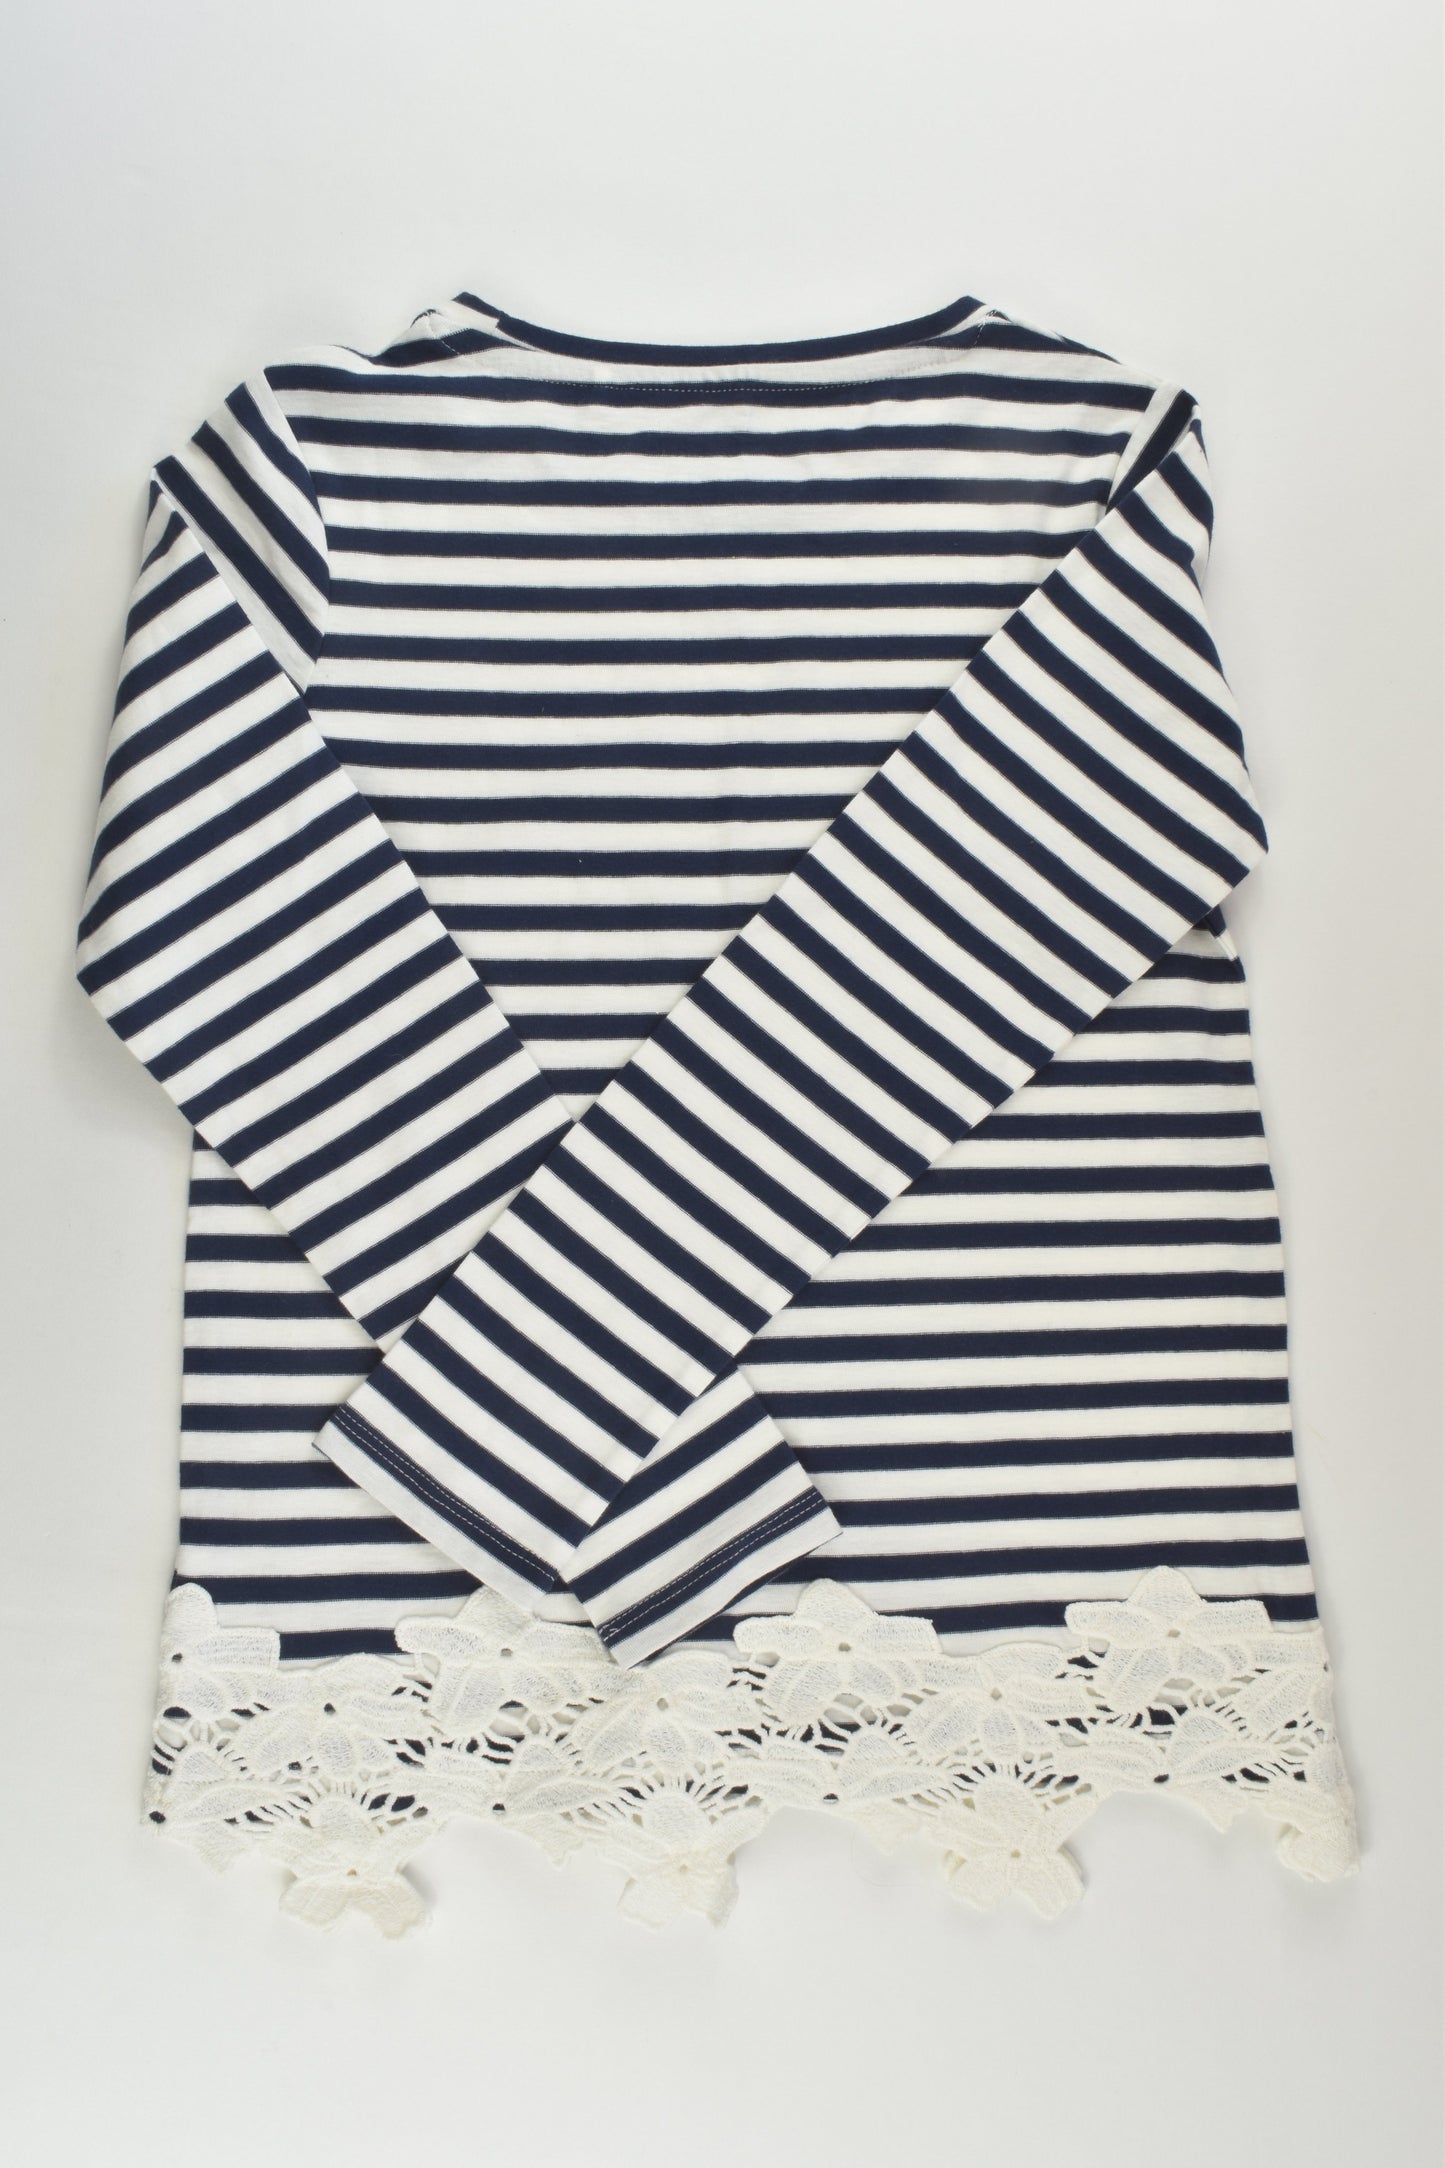 NEW Next Size 9 (134 cm) Striped Top with Lace Hem